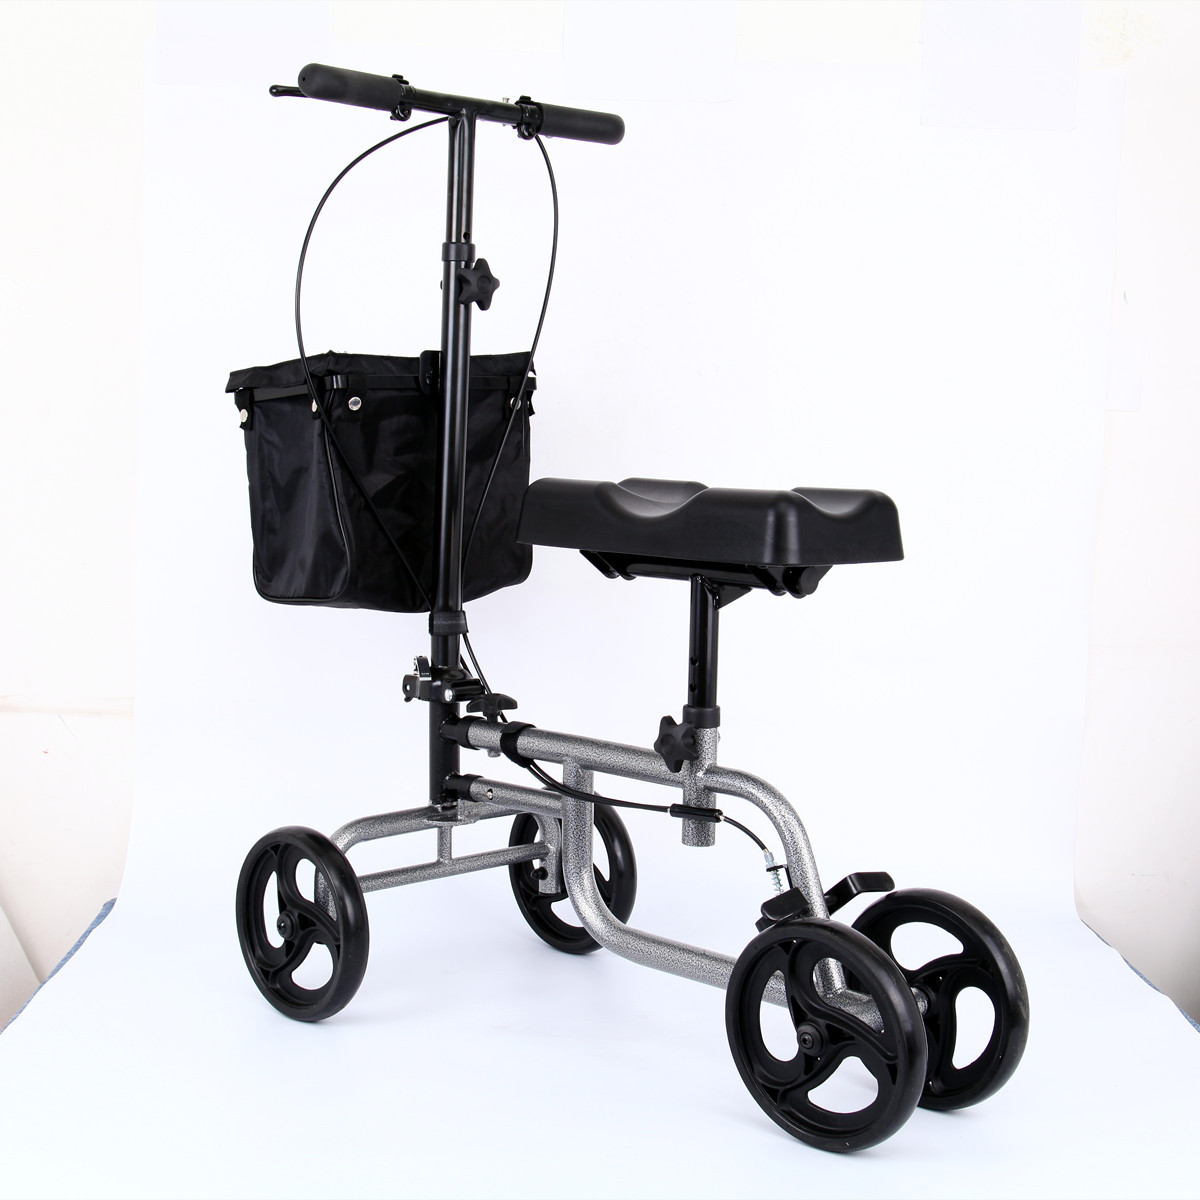 Knee-Walker-Scooter-Foldable-Adjusted-Height-Walking-Aid-Knee-Support-and-Basket-1940439-7